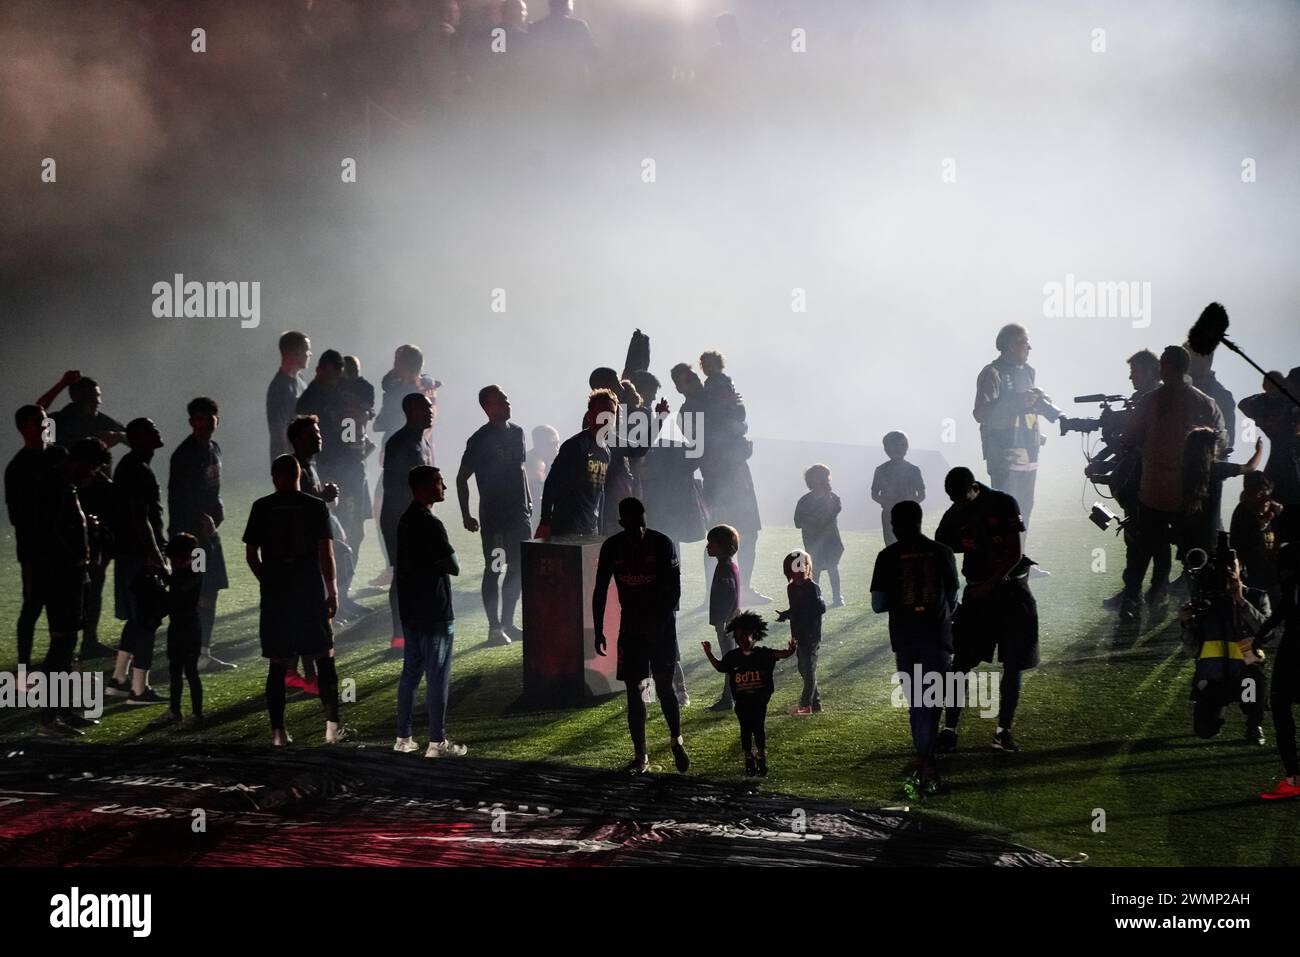 SMOKLE AND LIGHT, TITLE CELEBRATION, BARCELONA FC, 2019: Smoke and light during the trophy ceremony. Barcelona players on their victory lap parade to celebrate with the fans and their young children. The final game of the La Liga 2018-19 season in Spain between Barcelona FC and Levante at Camp Nou, Barcelona on 27 April 2019. Barca won the game 1-0 with a second half Messi goal to clinch back-to-back La Liga titles and their eighth in 11 years. Stock Photo